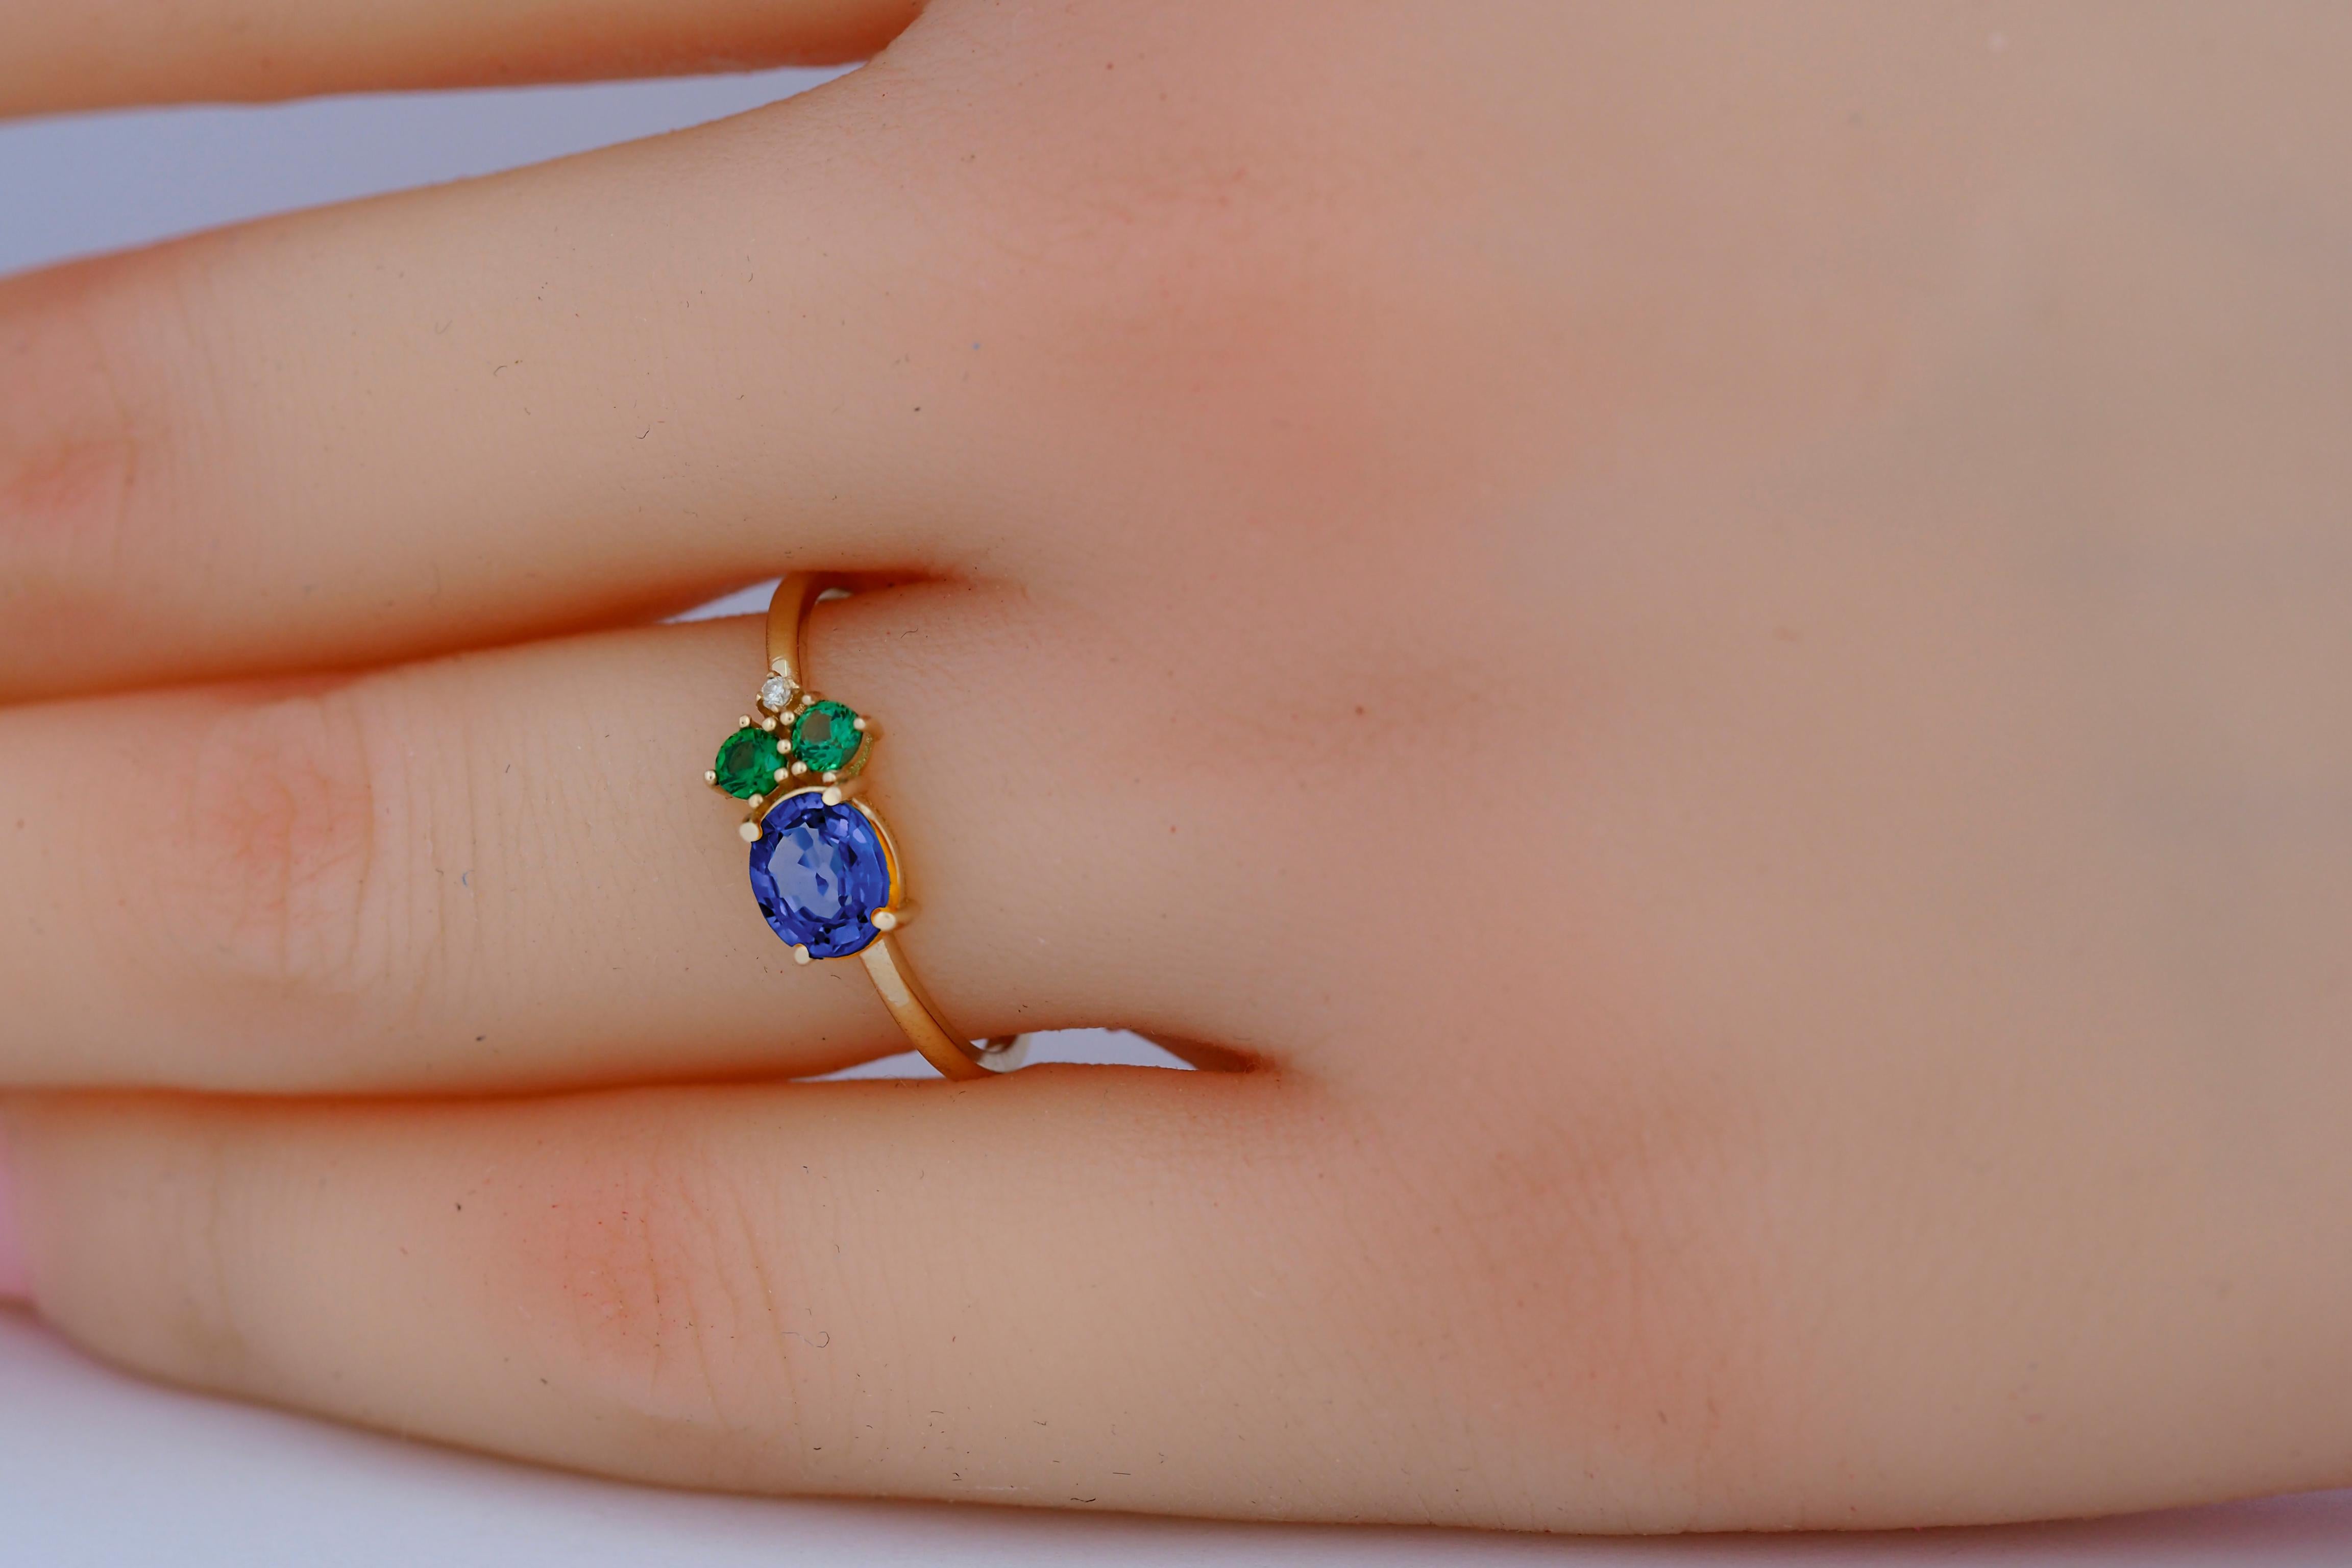 Oval sapphire, tsavorite and diamonds 14k gold ring.
Blue sapphire gold ring. Sapphire cluster ring. Sapphire engagement ring.

Metal: 14k gold
Weight: 1.8 gr (depends from size)

Gemstones:
Set with sapphire color - blue
Oval cut, aprox 0.80